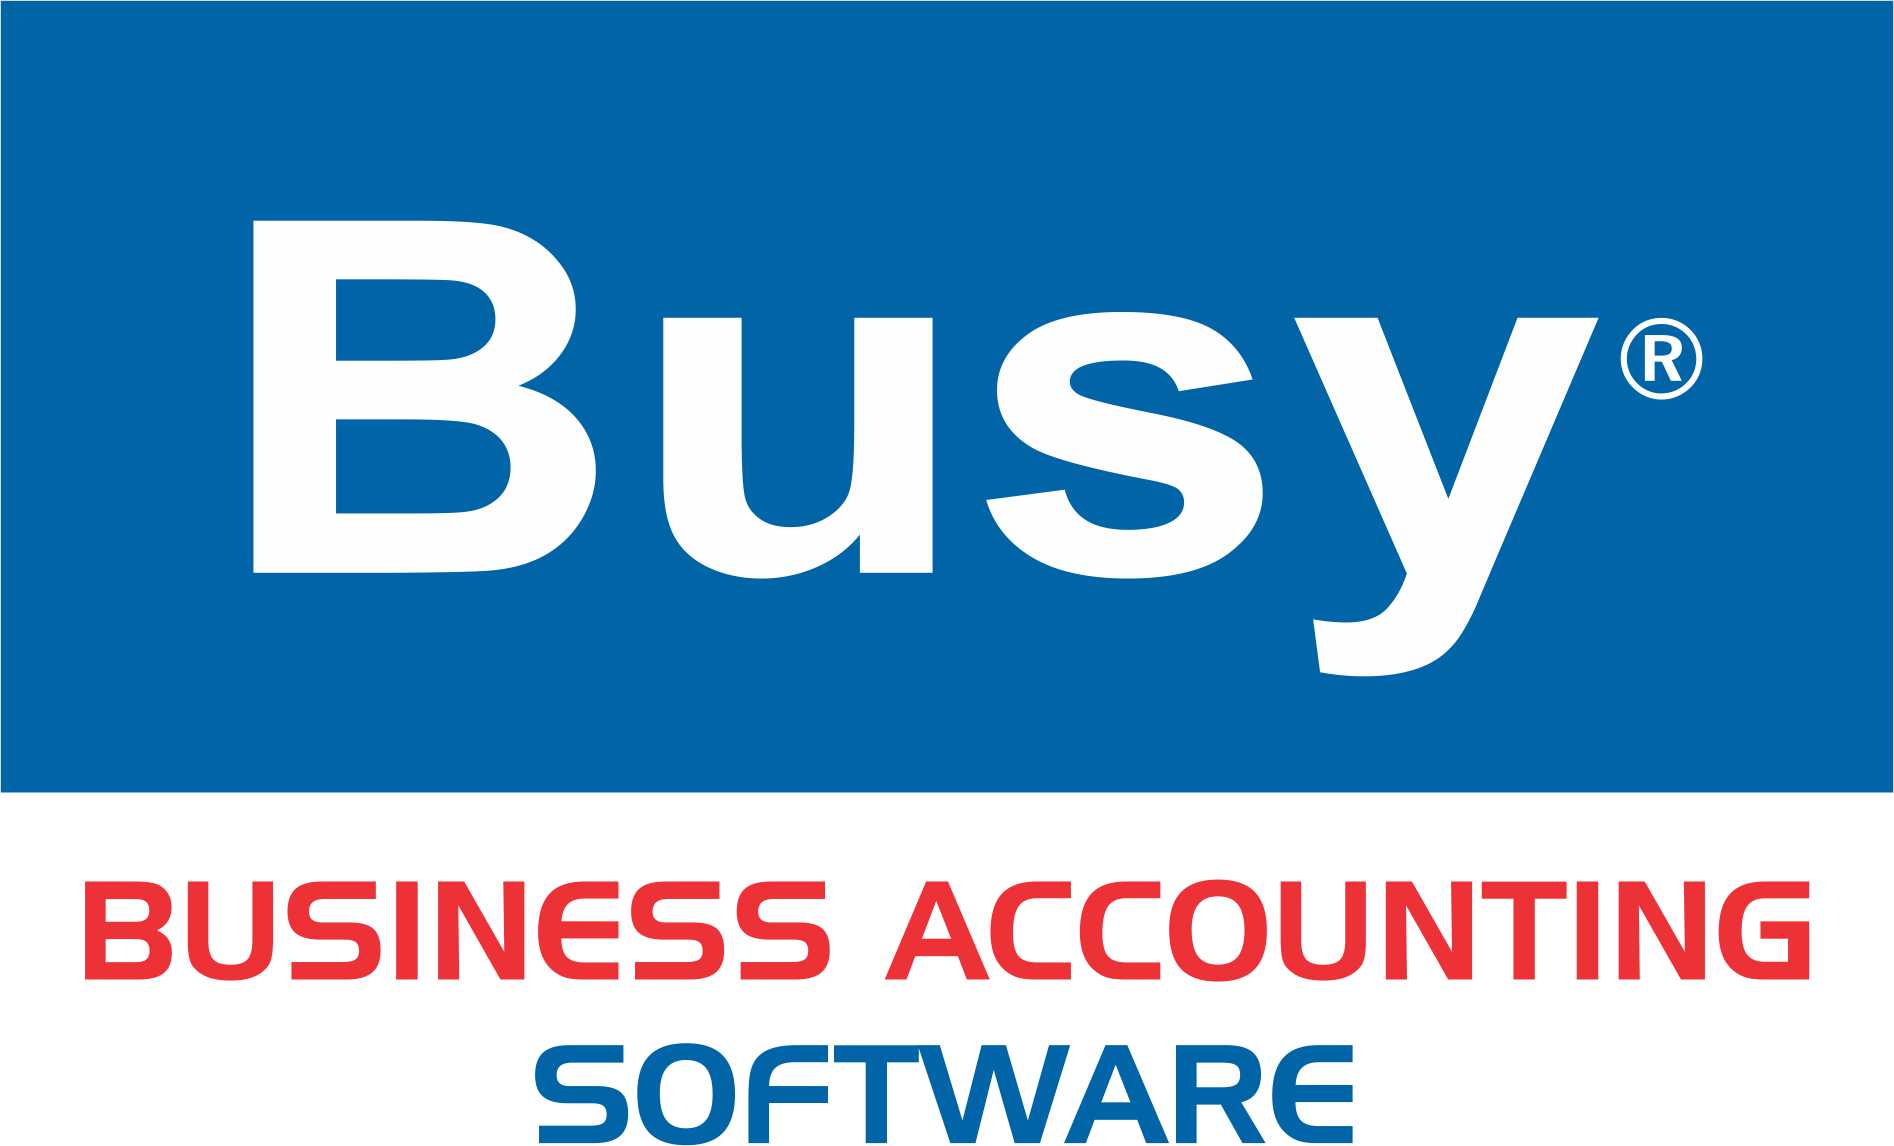 Busy Accounting Software Software Reviews, Demo & Pricing - 2023